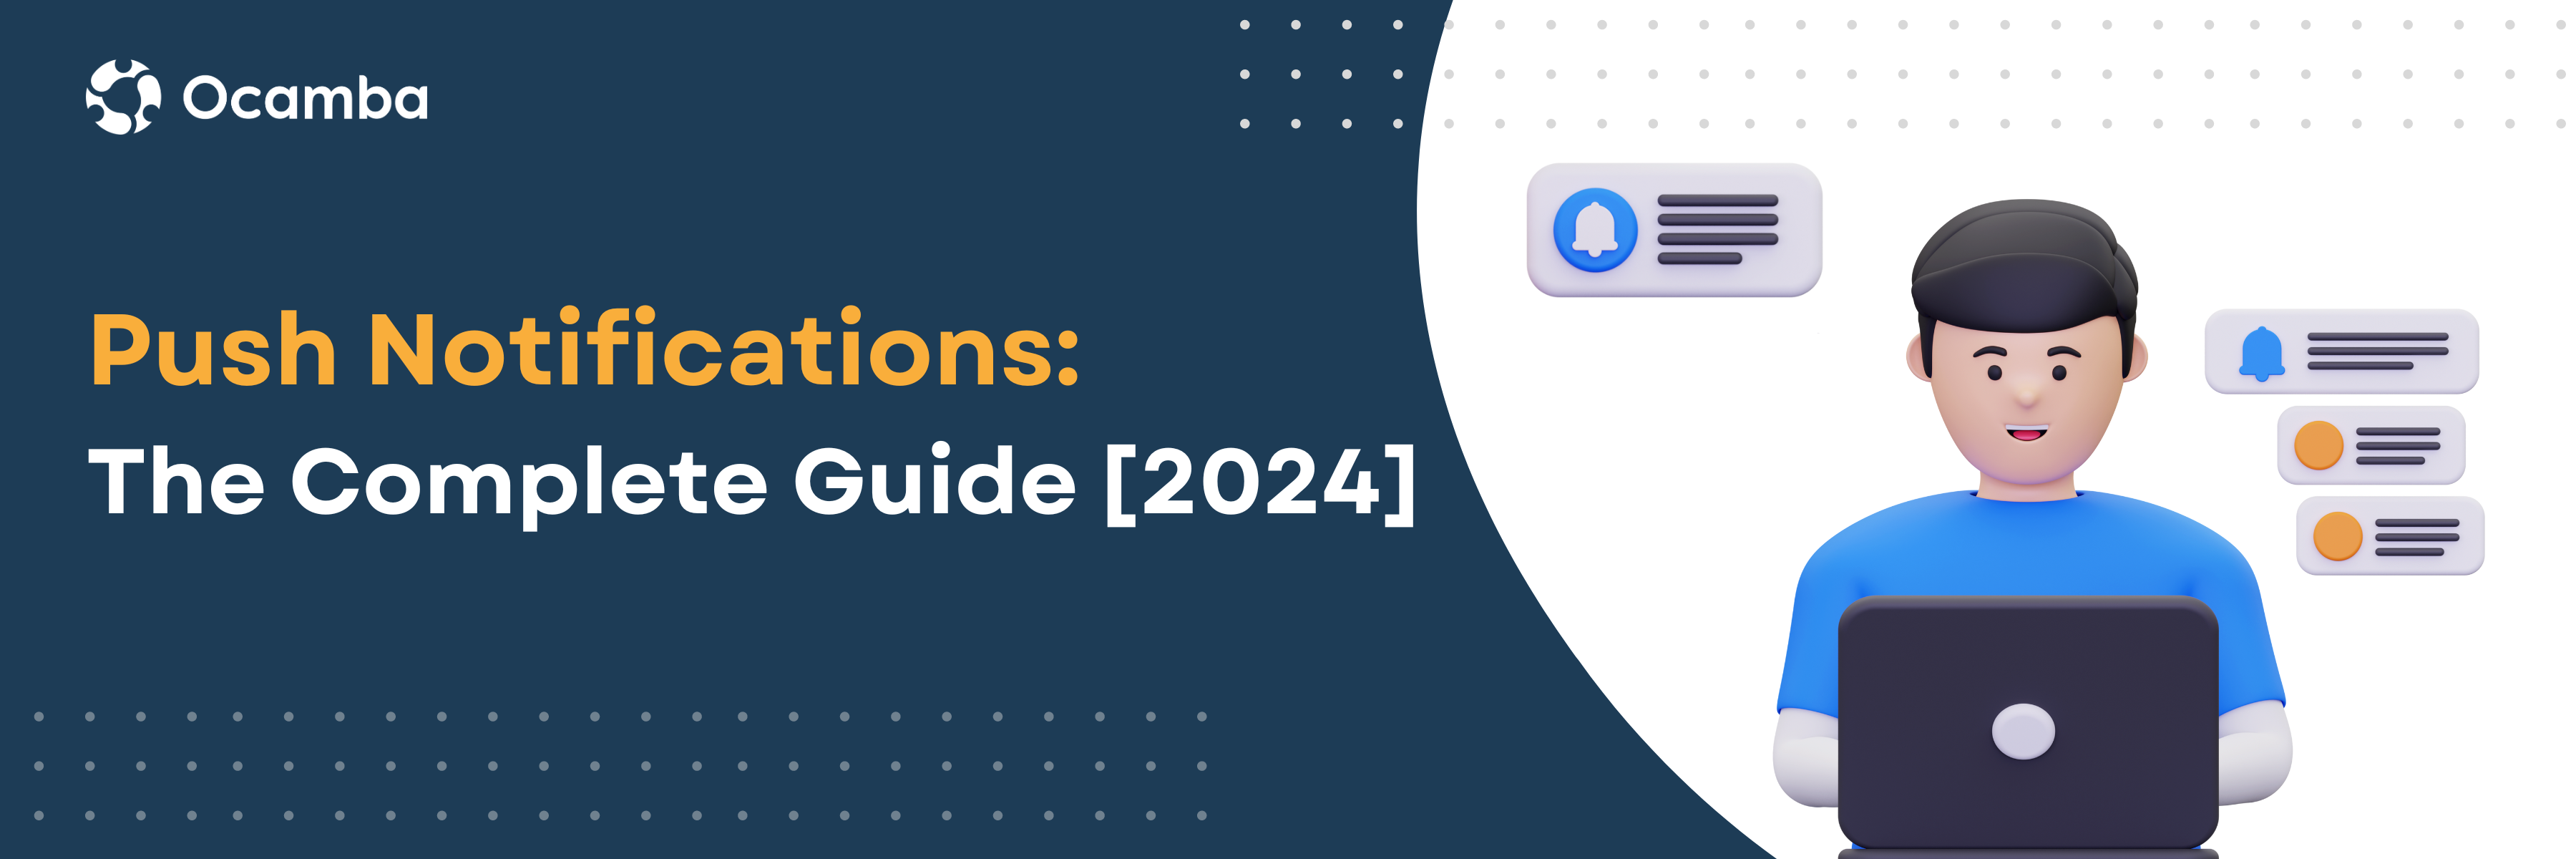 Push notifications: The Complete Guide [2024]